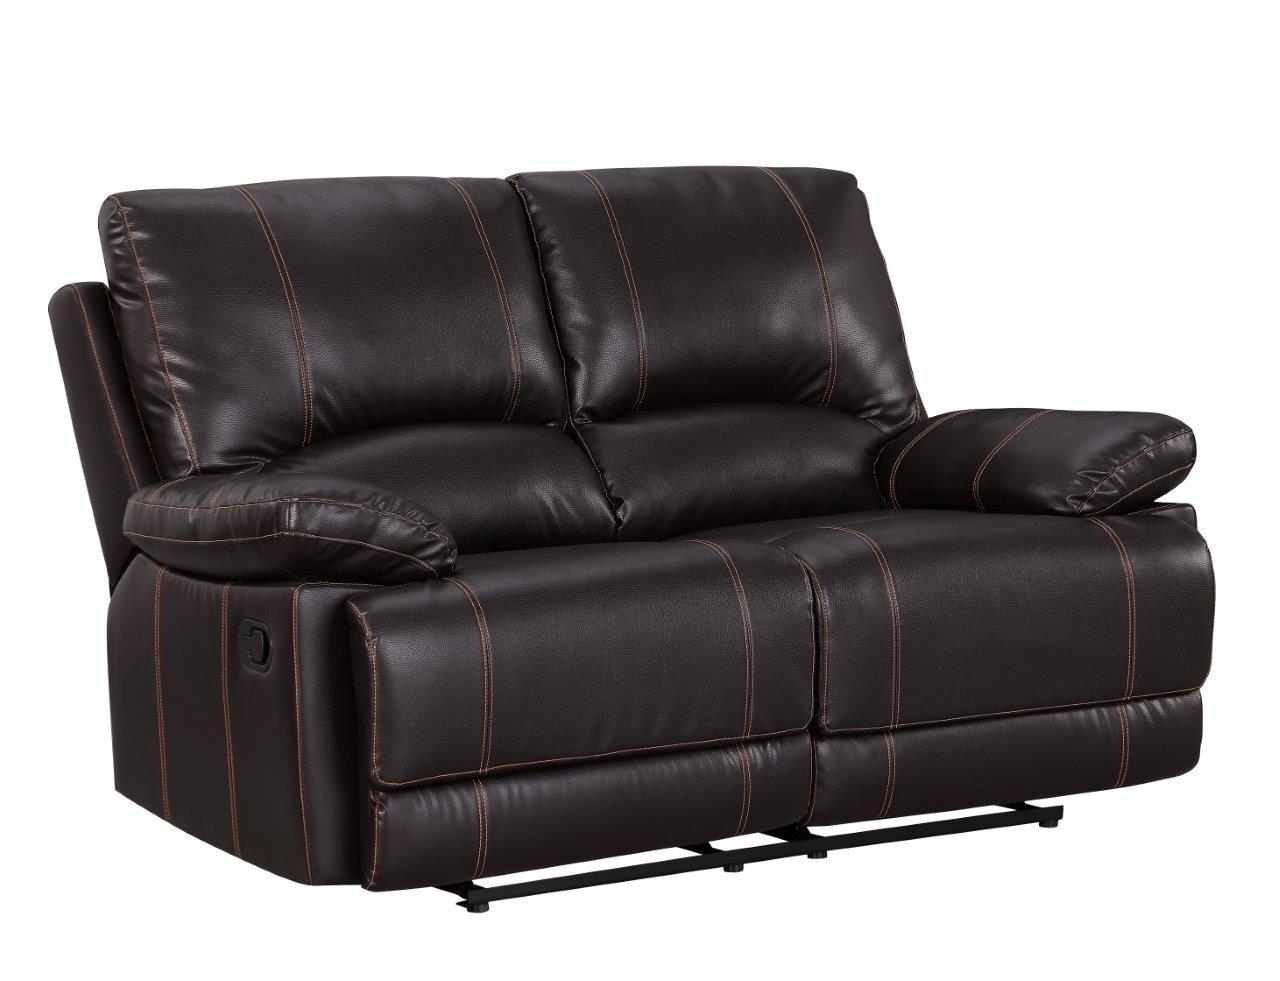 Contemporary Reclining Loveseat 9345 9345-BROWN-L in Brown Leather Match